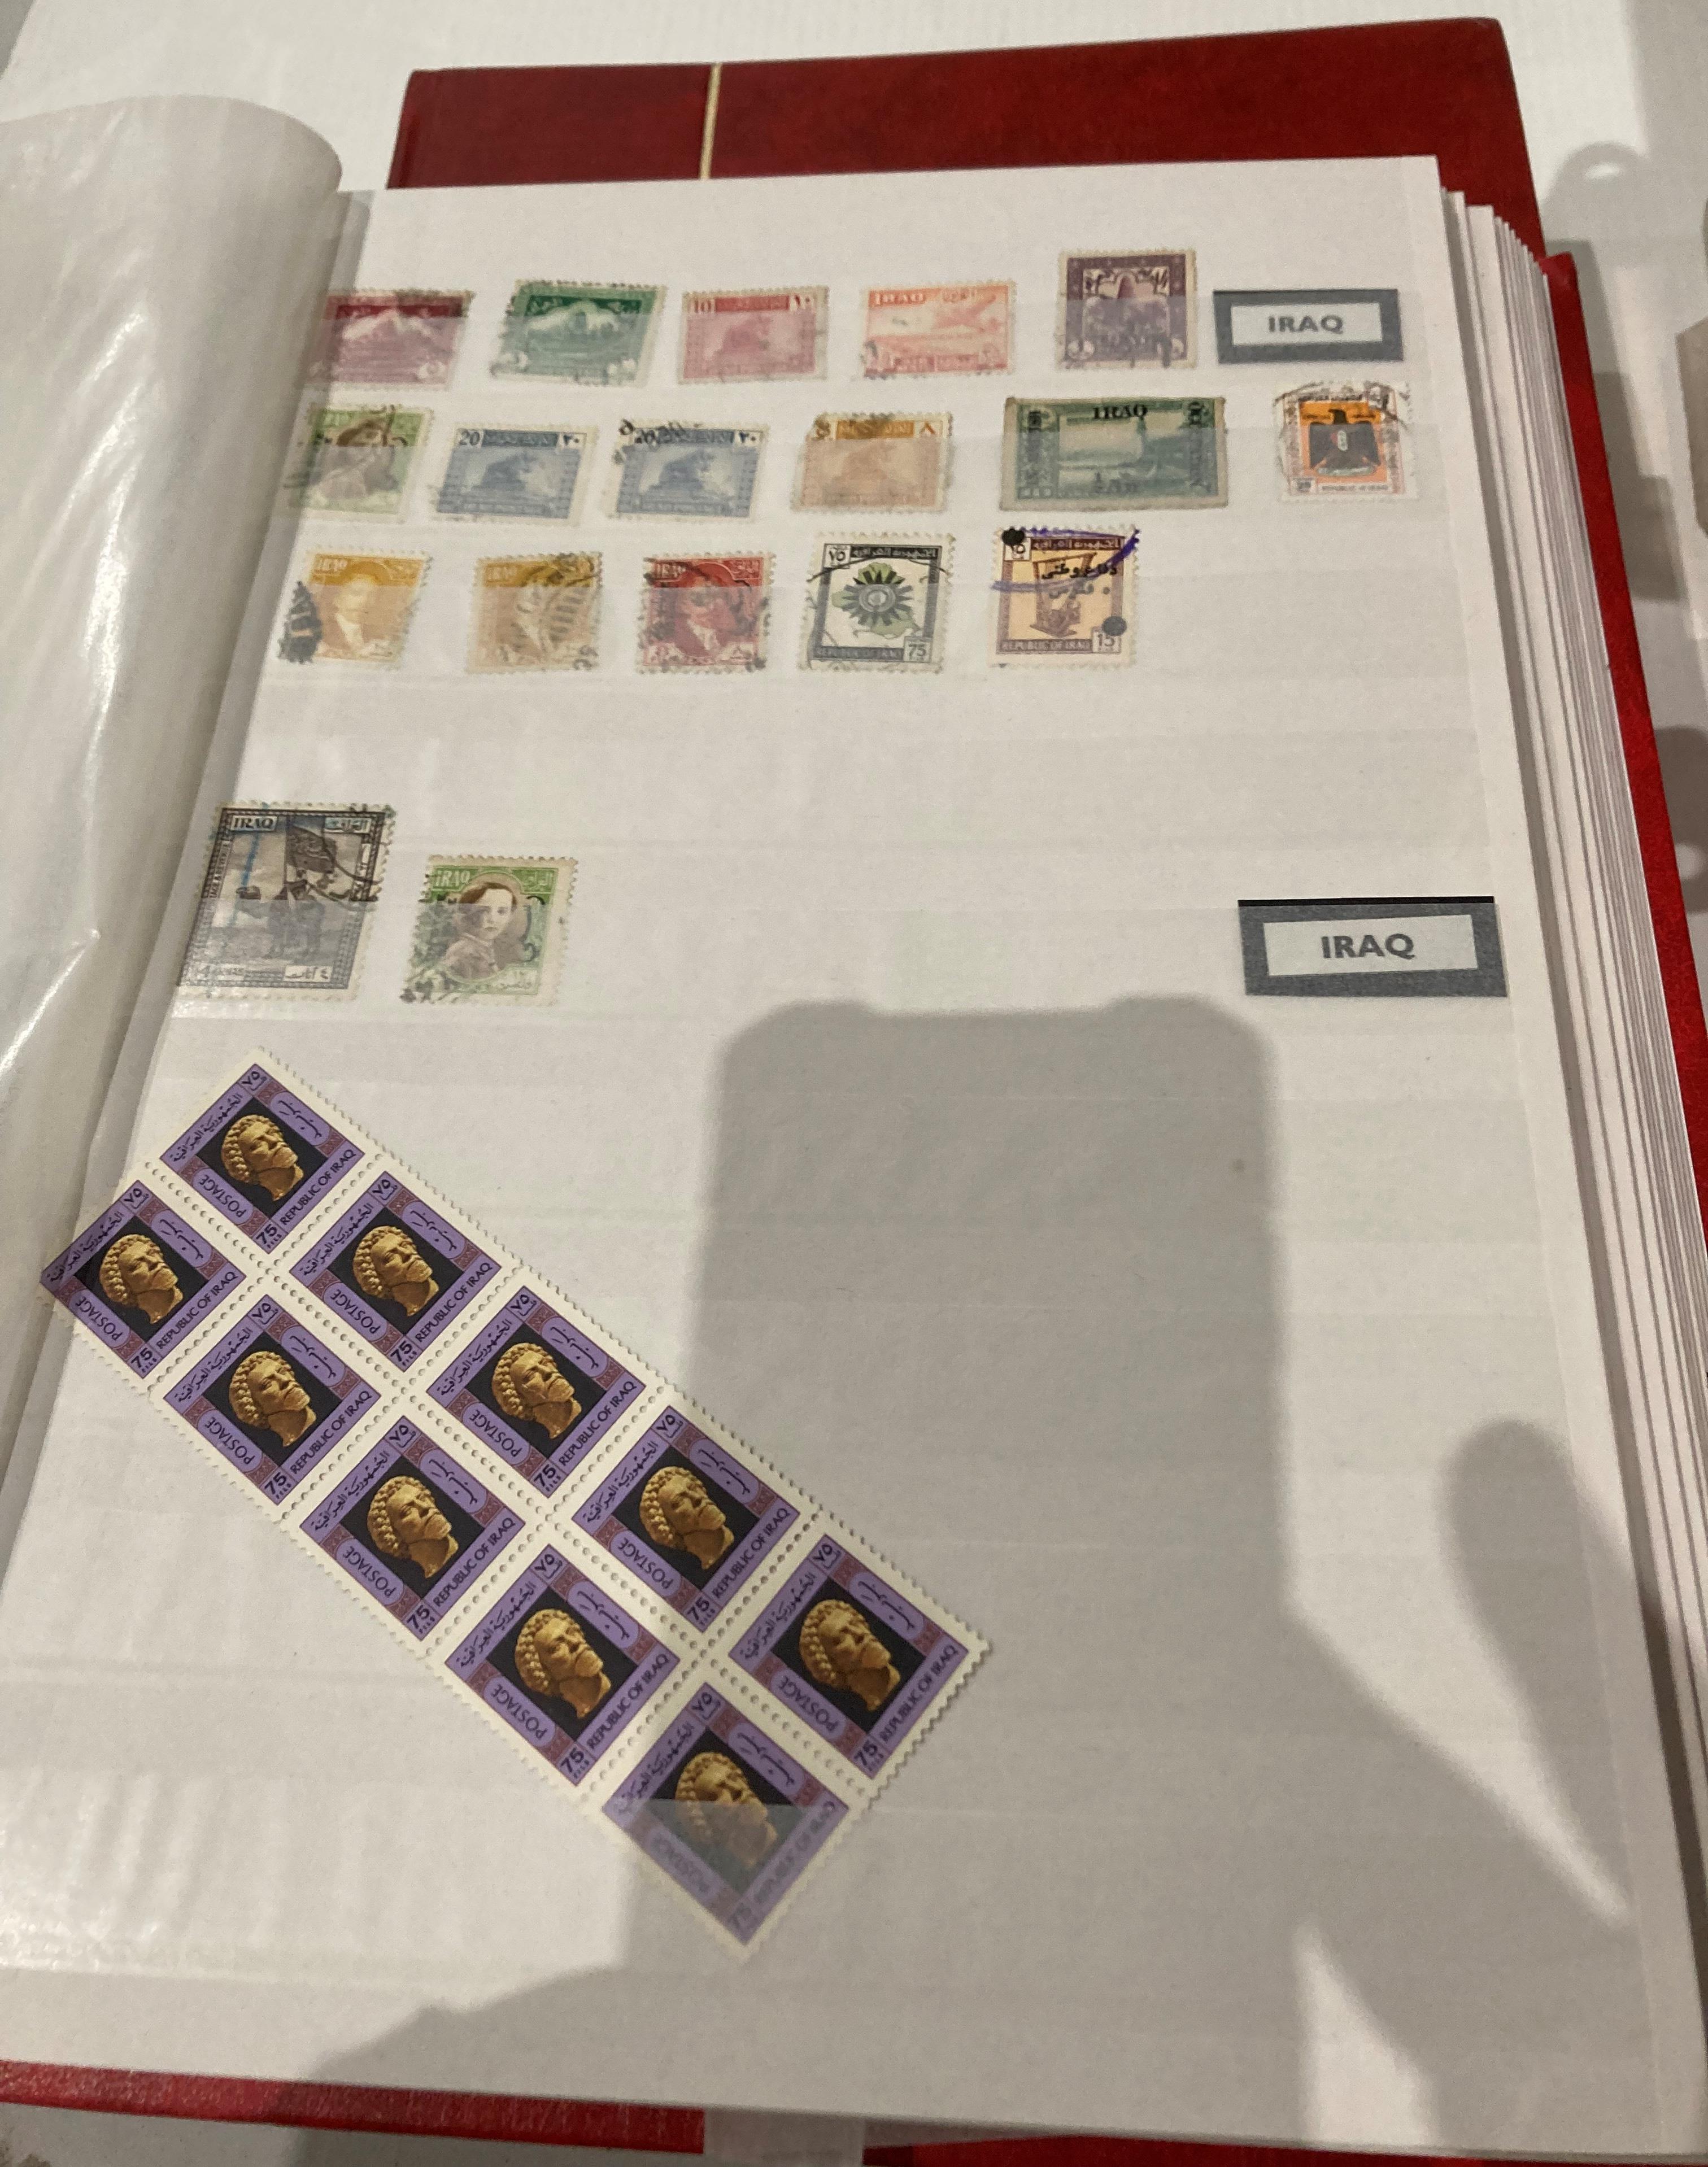 Contents to crate - eleven stamp albums and contents - European, Asia, Middle East, - Image 4 of 9